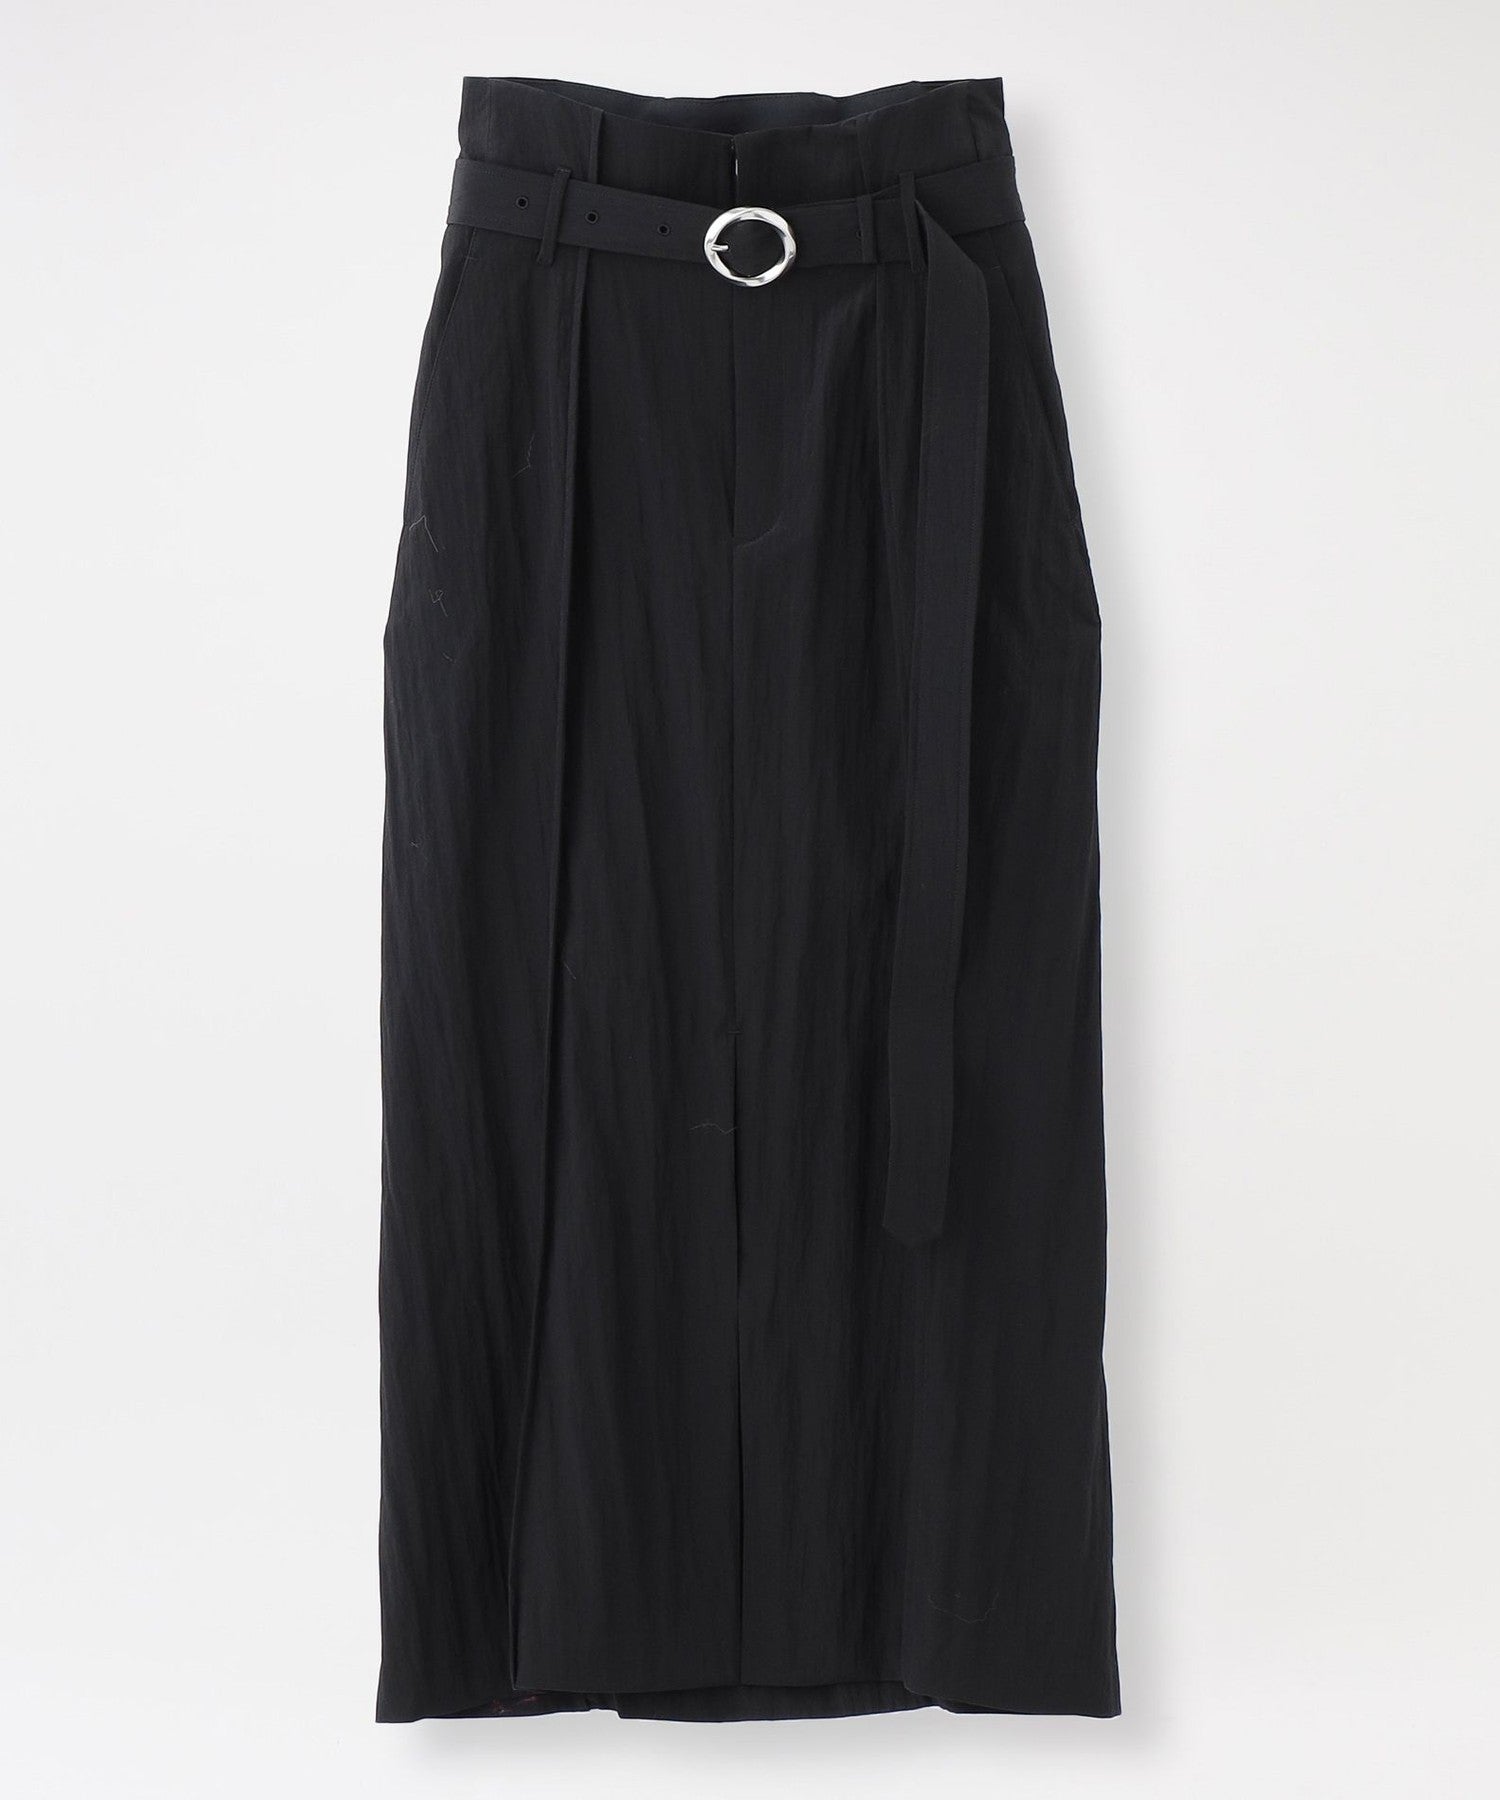 【YOHEI OHNO/ヨウヘイオオノ】スカート ＂Our Basic＂ Skirt OH-23A-SK2-A